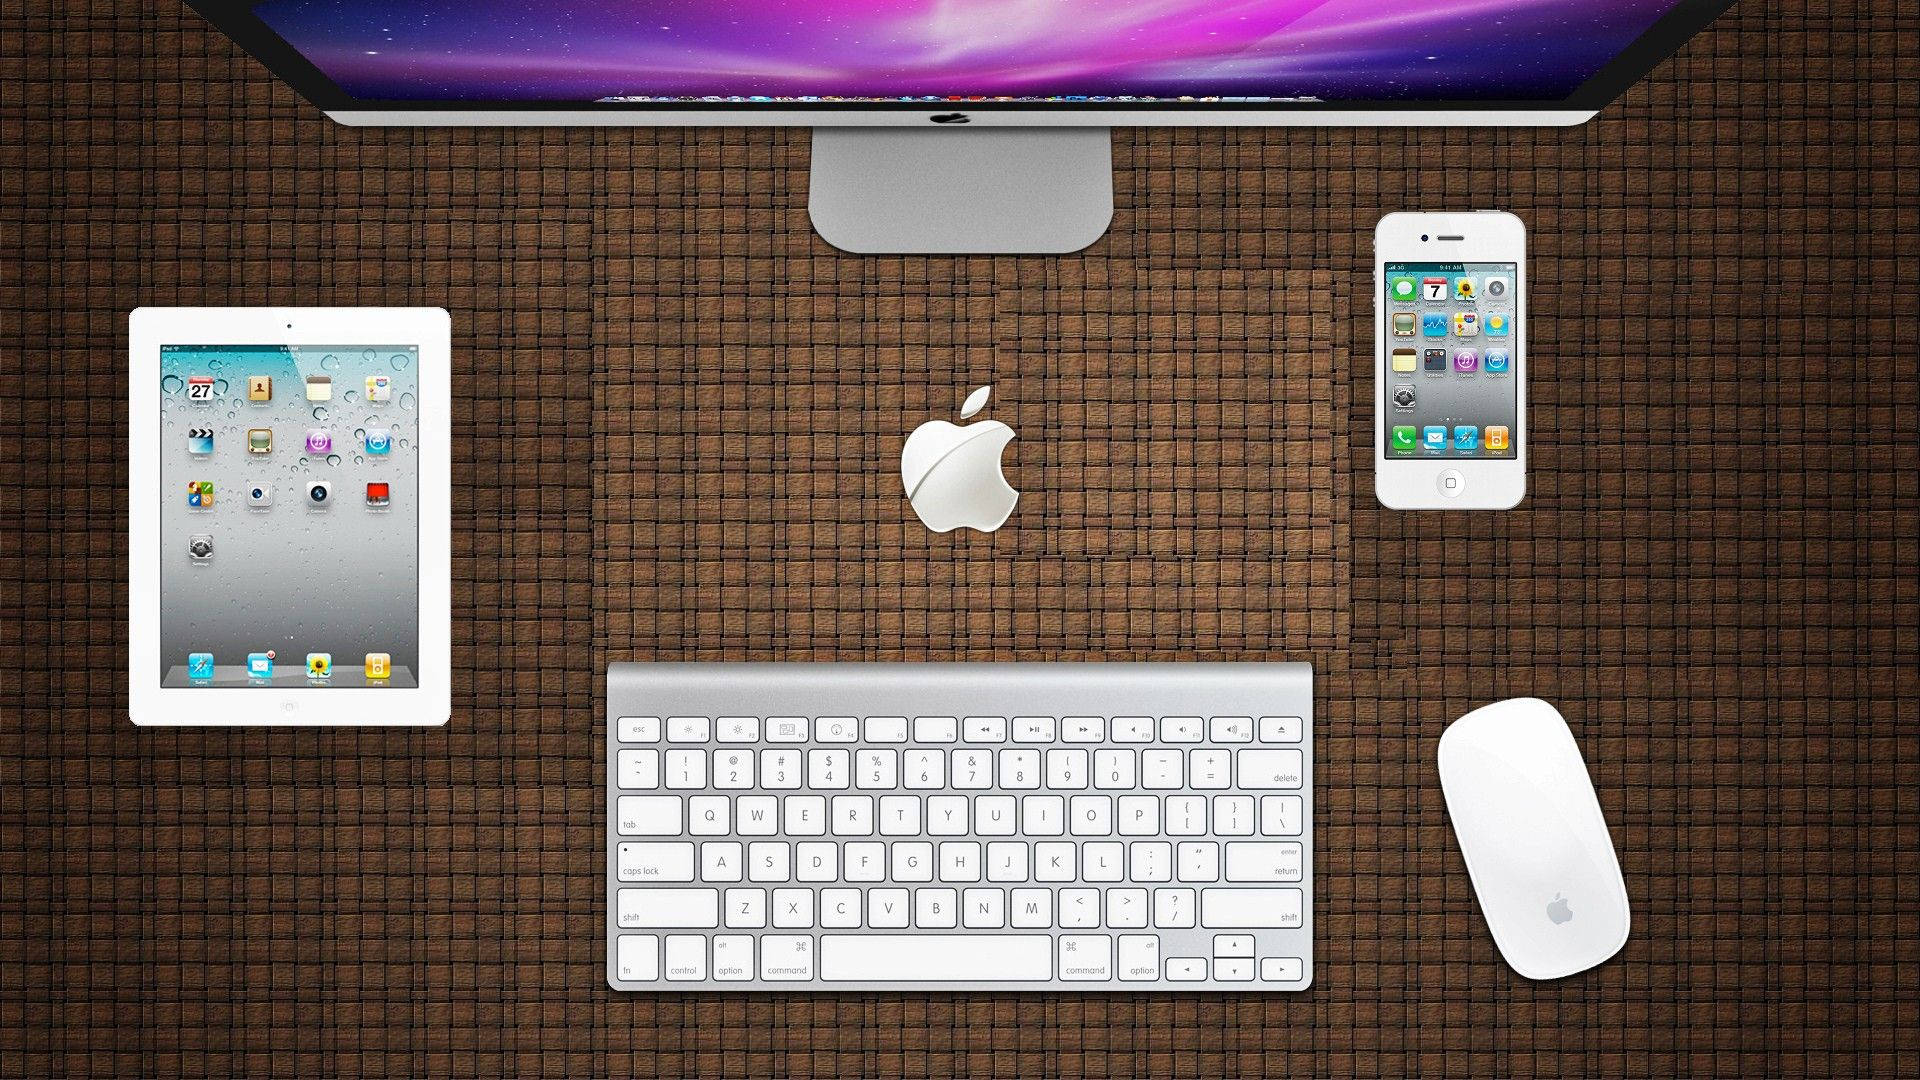 Apple Products Office Desk Set-up Picture